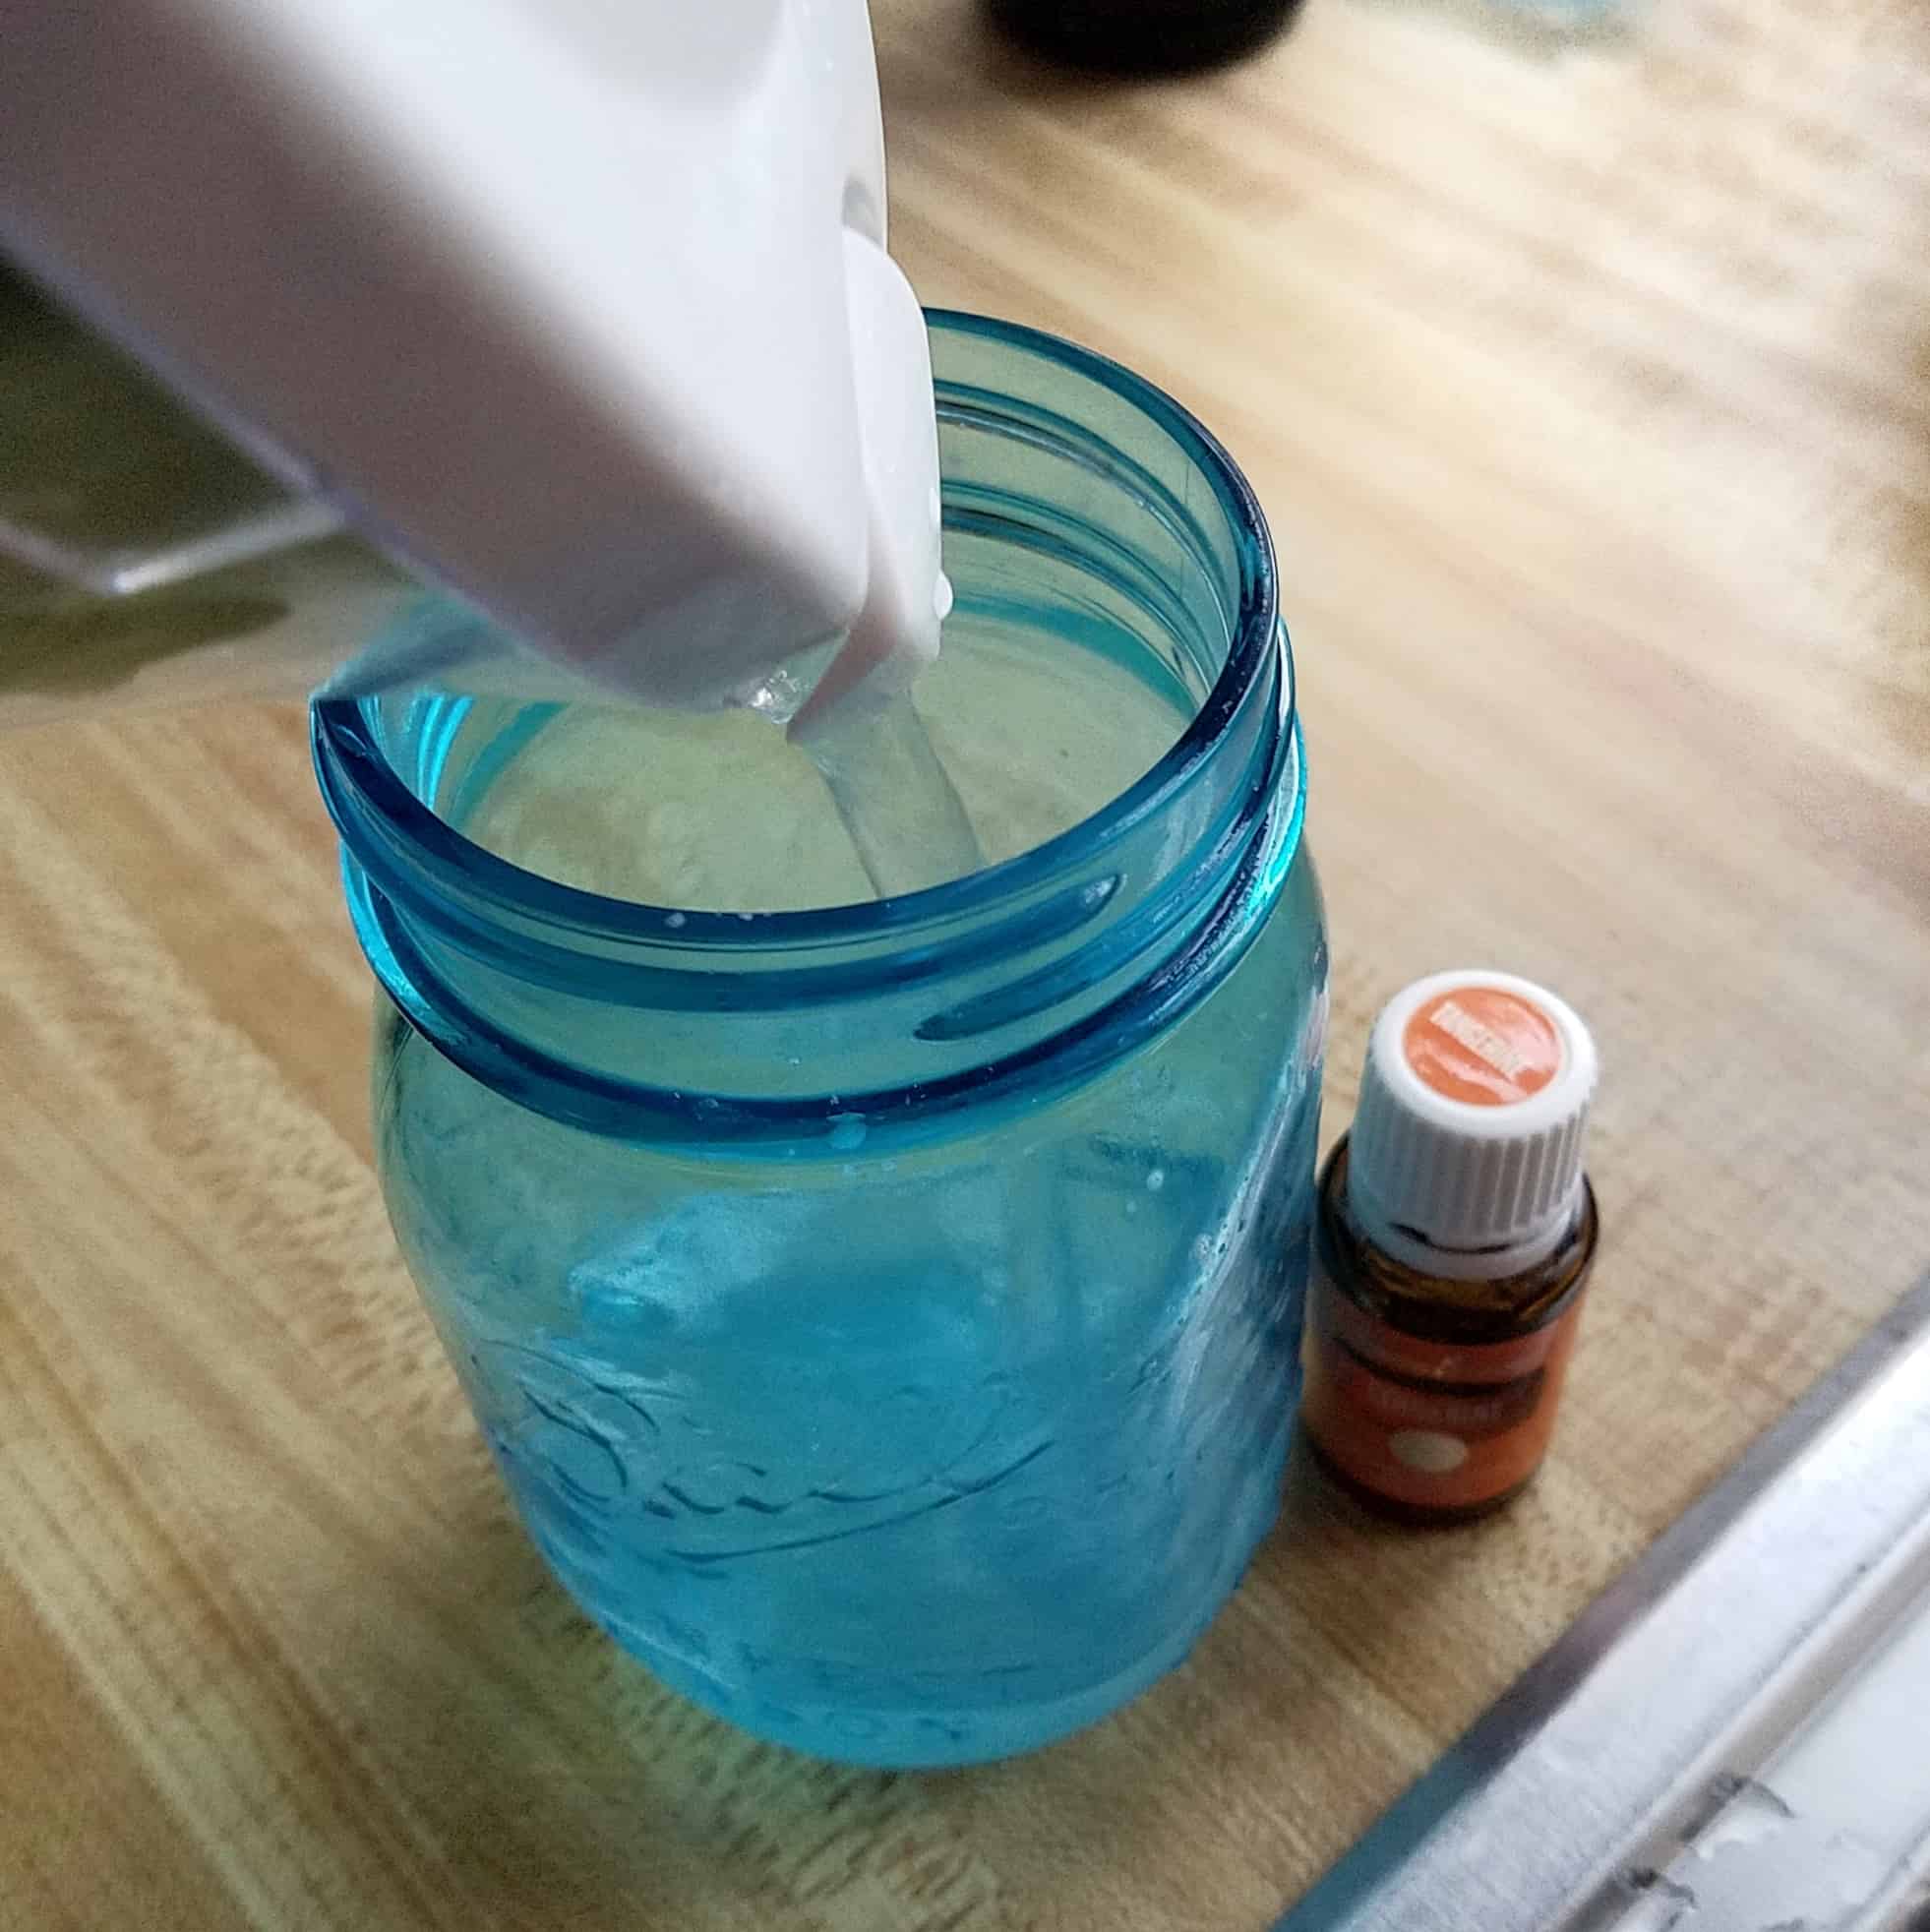 Going toxin free meant giving up all my yummy smelling products, so making this tangy tangerine DIY dish soap is a perfectly delicious replacement!